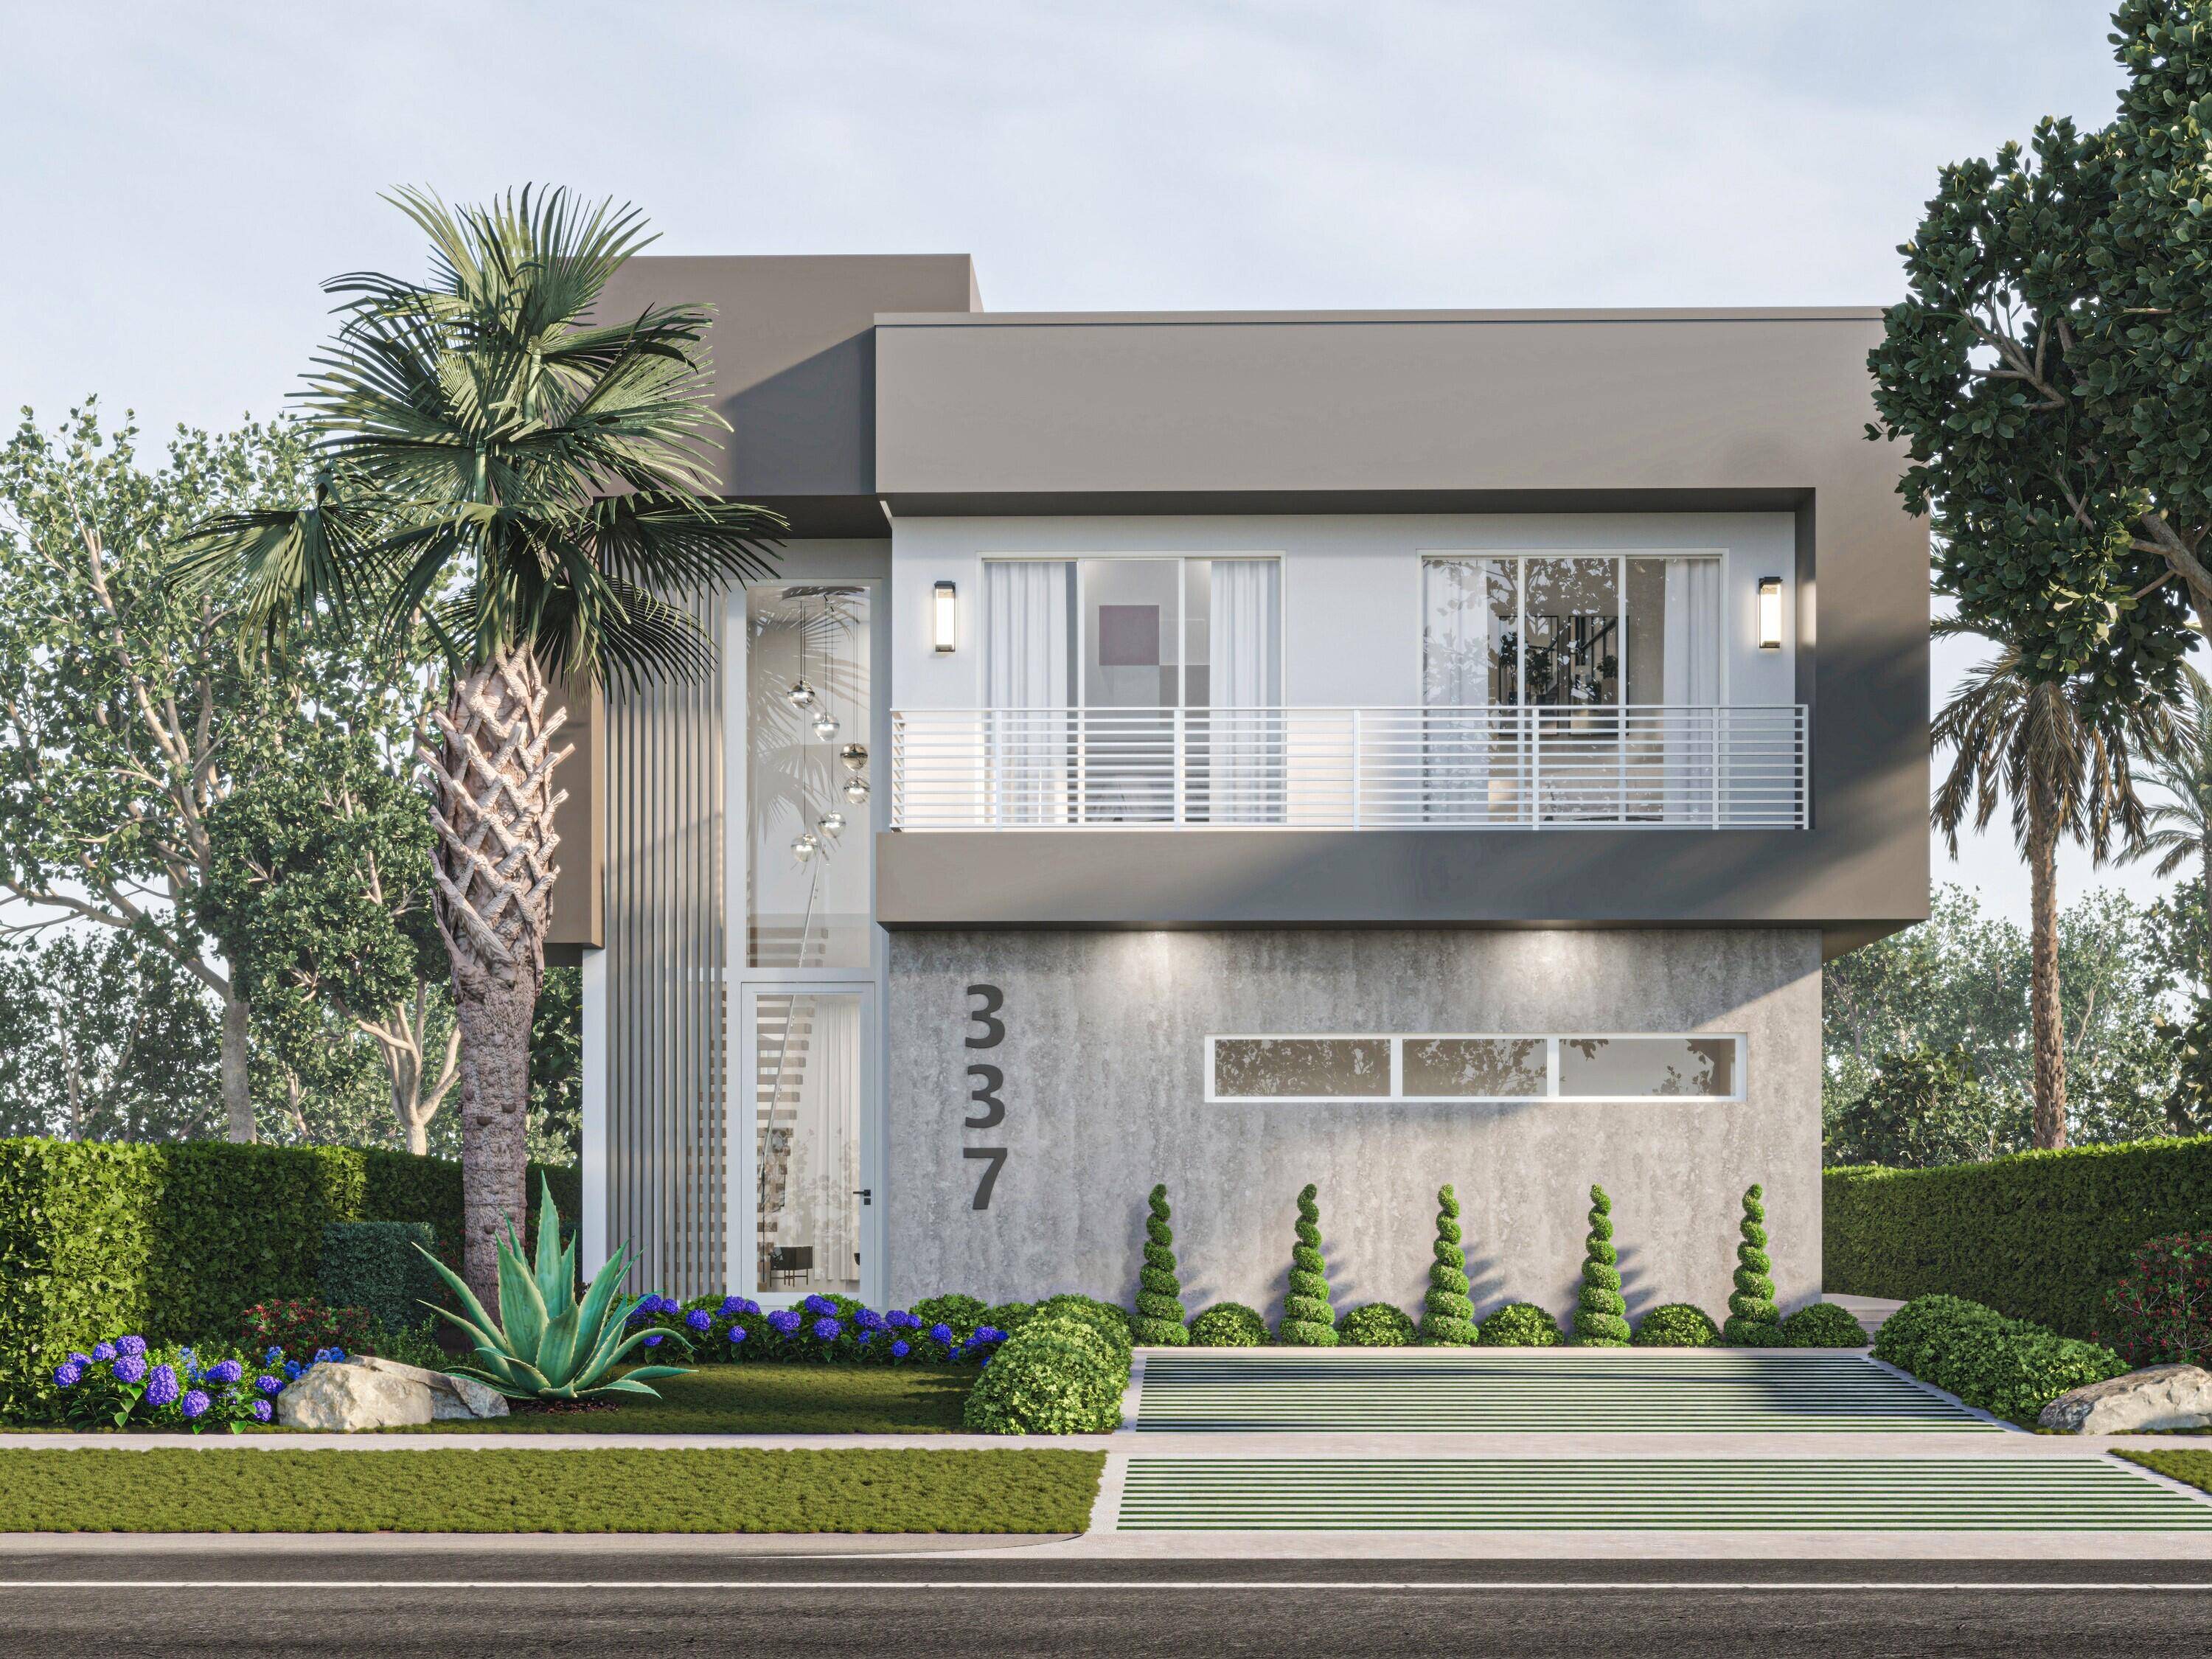 New Exquisite, Modern Home Offers Luxury Living in Upscale Delray BeachIf you're looking for both a new, modern design home combined with an investment income opportunity in an exciting, upscale ...